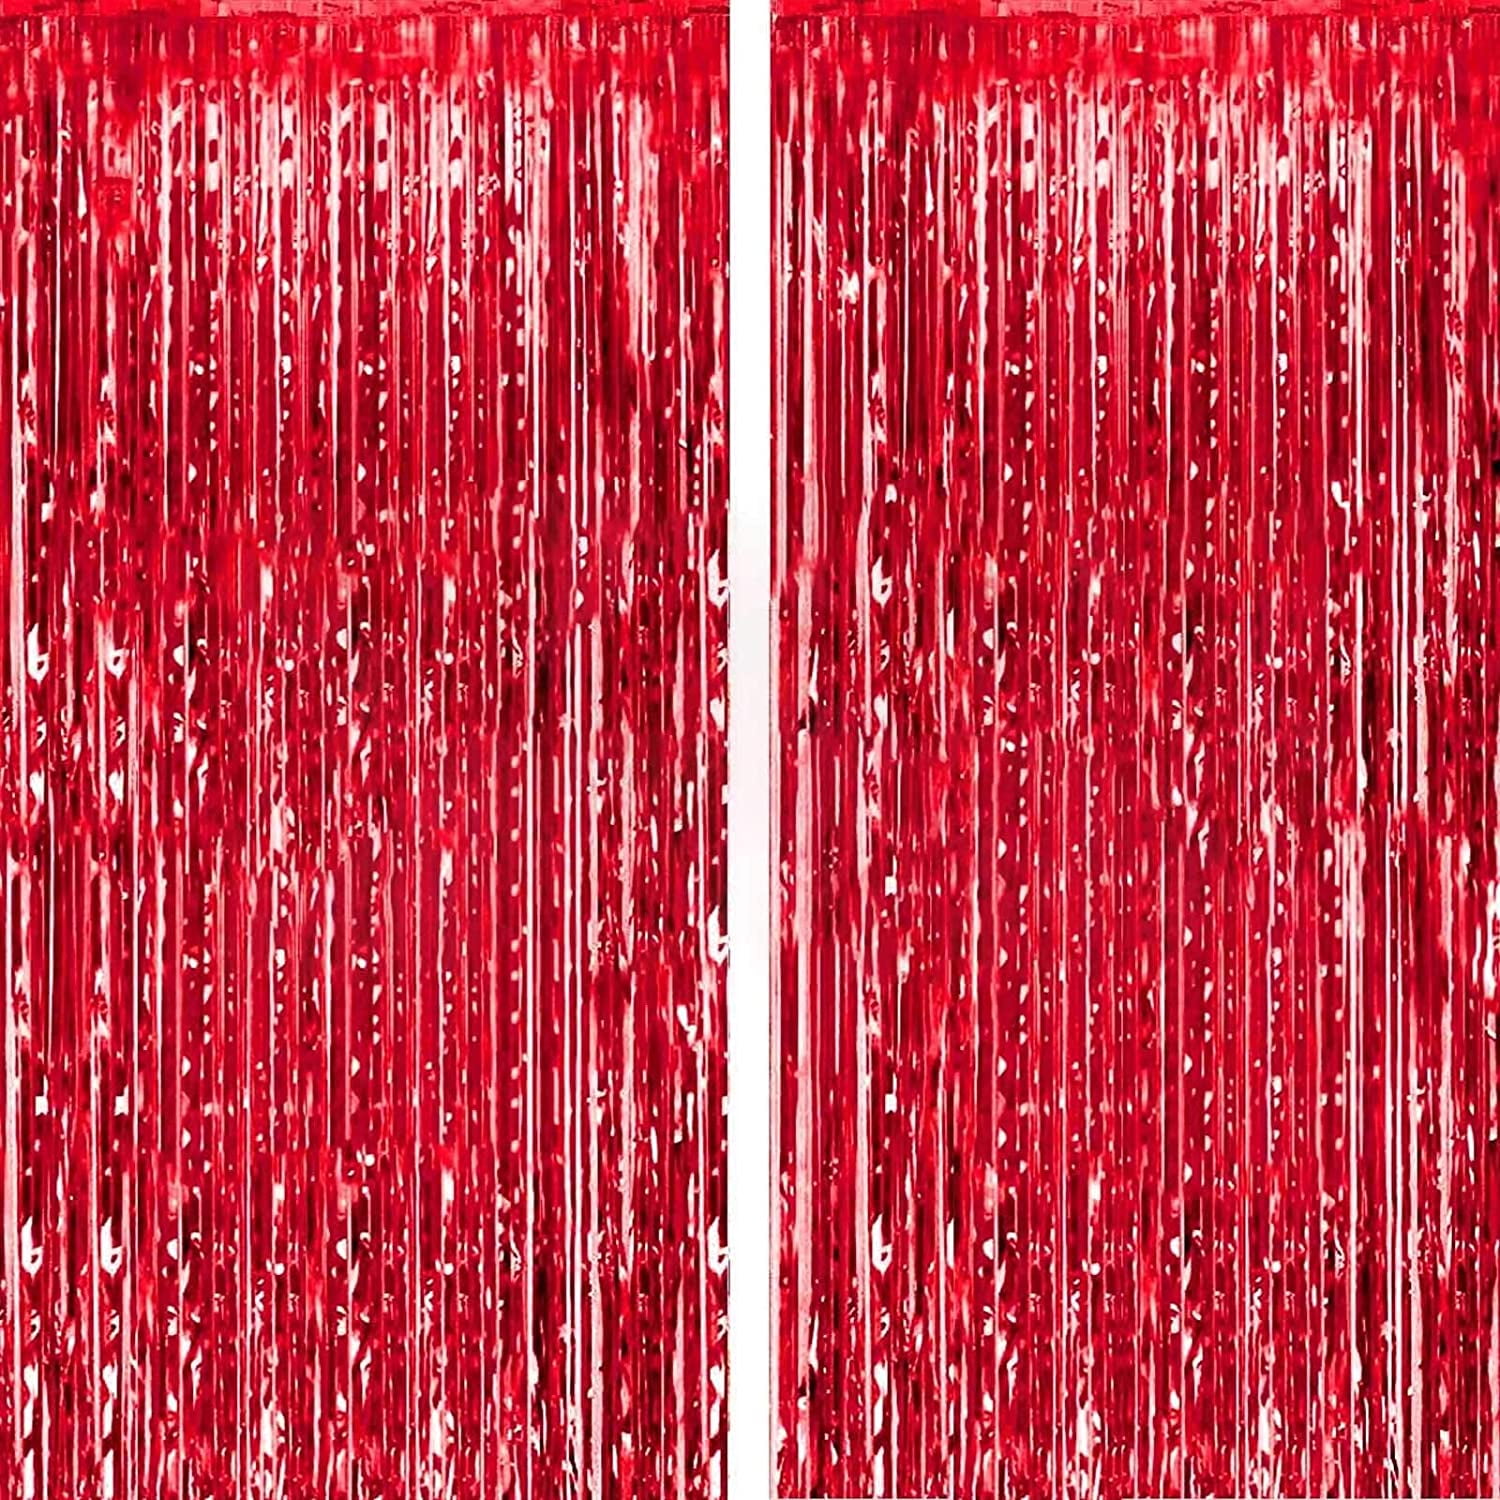 Chainplus 3 ft x 8 ft Metallic Tinsel Foil Fringe Curtains for Party Photo  Backdrop Wedding Decor (2 Pack, Rose red) 